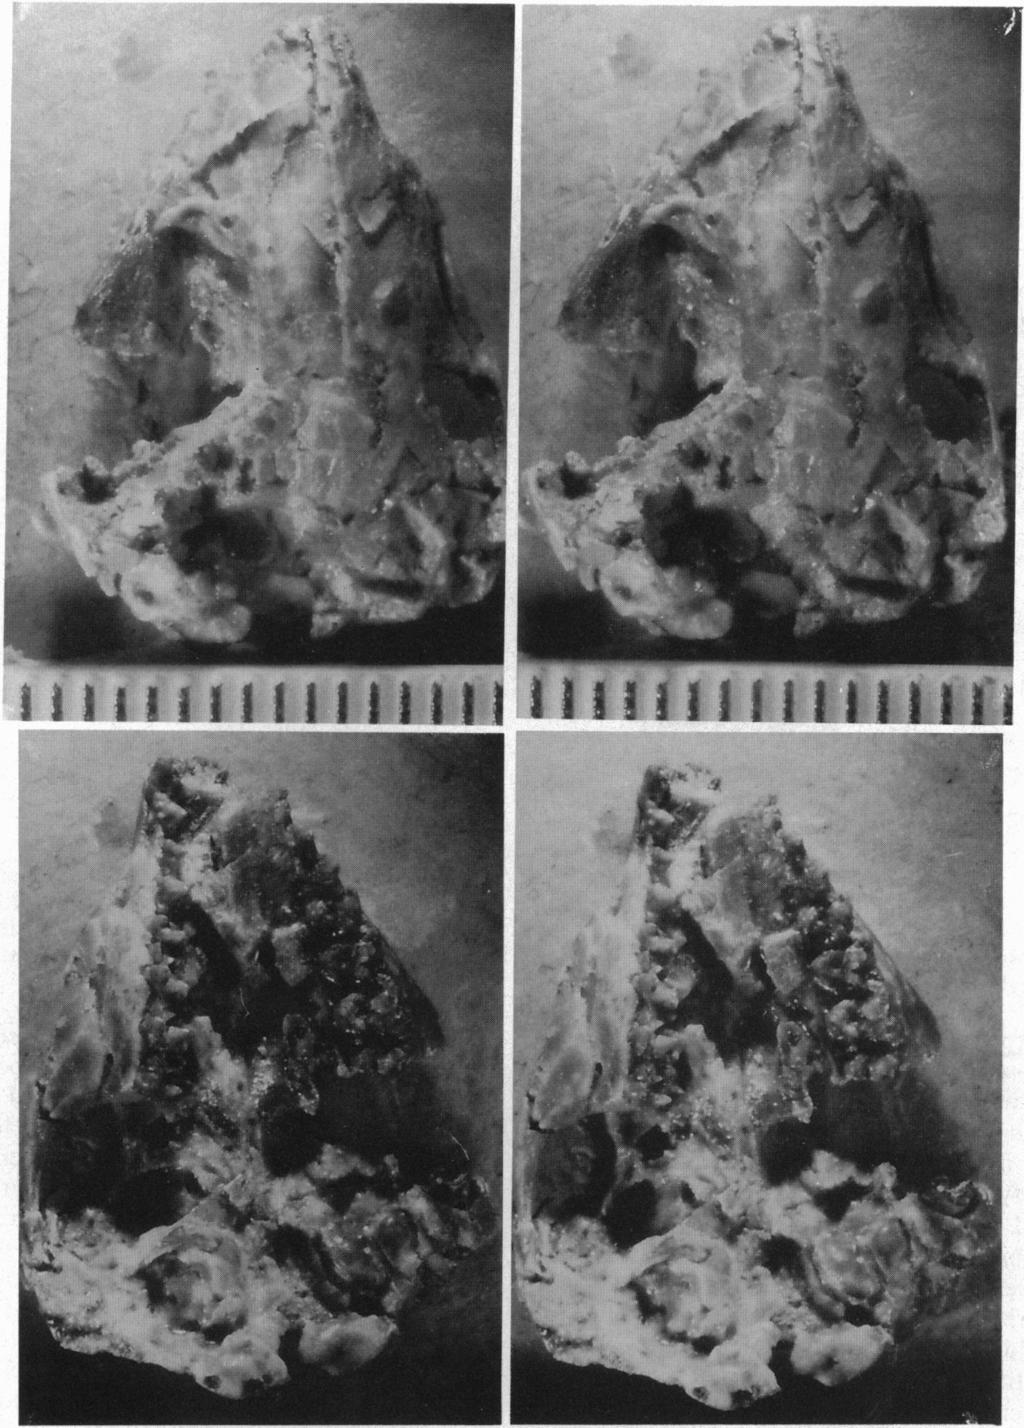 Evolution: Trofimov and Szalay Proc. Natl. Acad. Sci. USA 91 (1994) 12571 FIG. 2. Asiatherium reshetovi, stereophotos in dorsal (Upper) and ventral (Lower) views. (Subdivisions on scale = 1 mm.